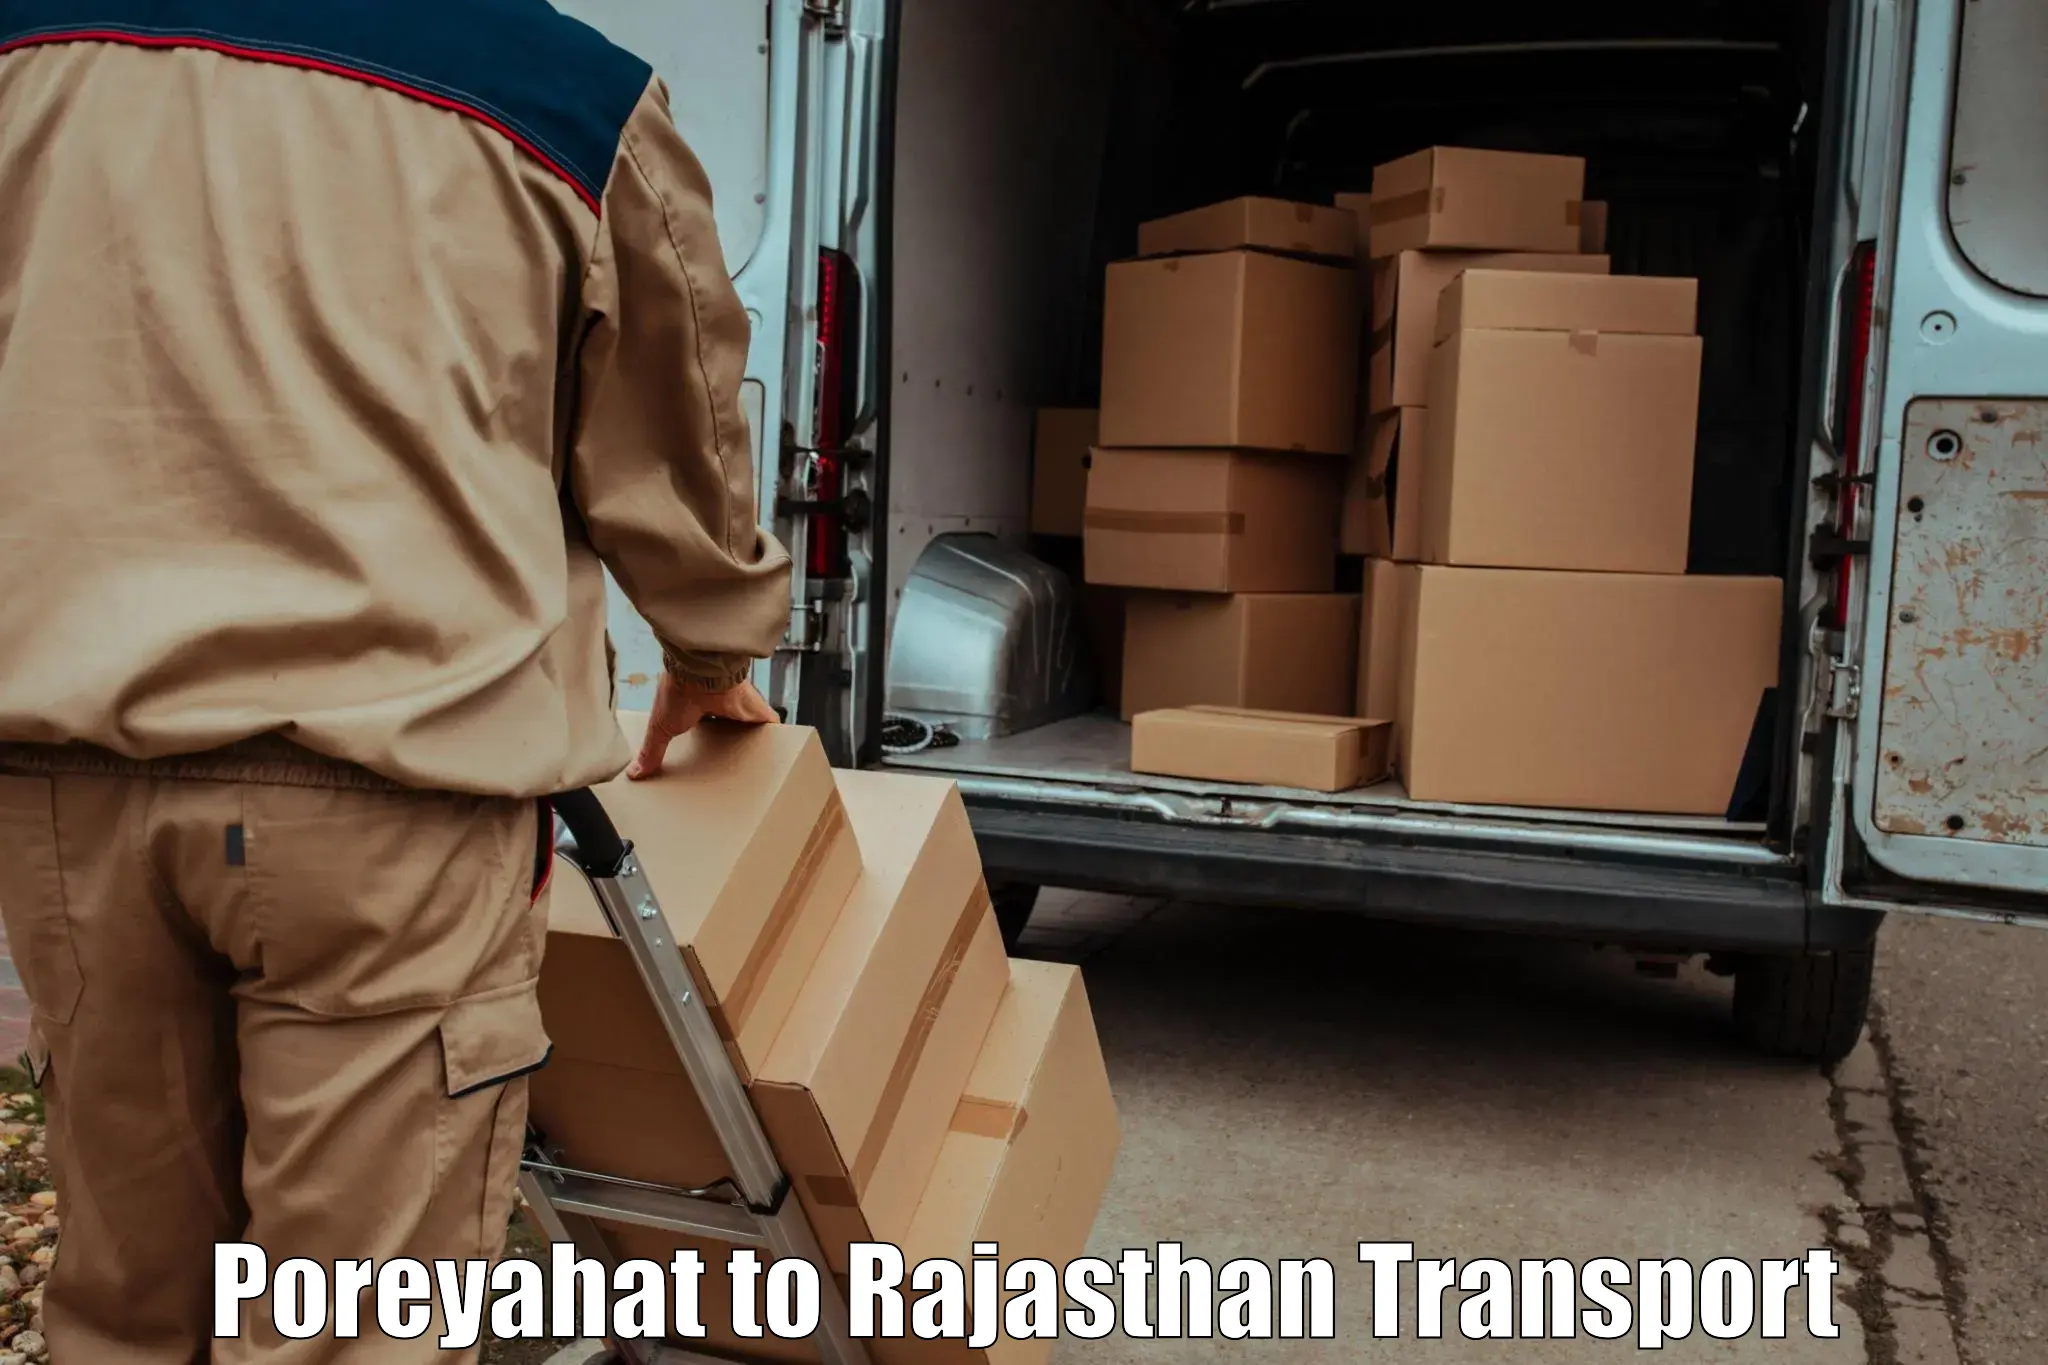 Transport shared services Poreyahat to Bhadsora